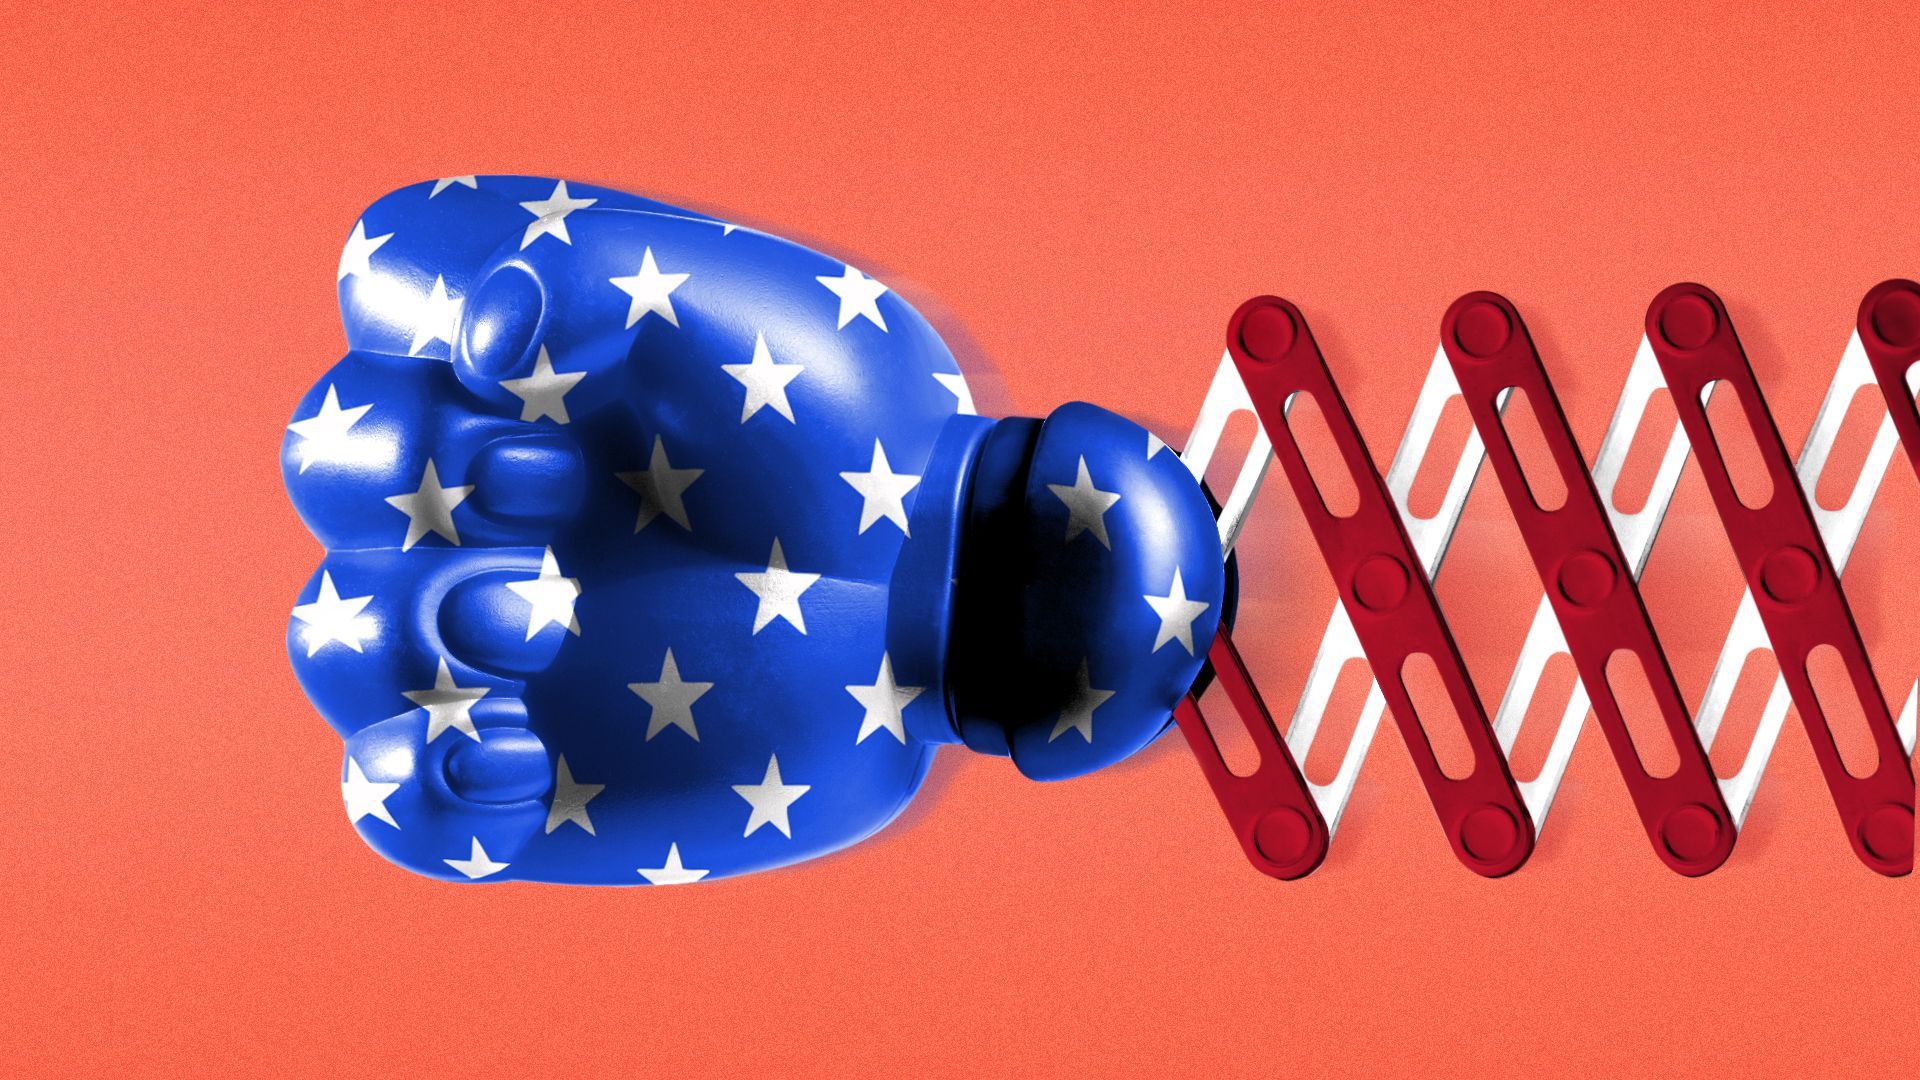 Illustration of a punching hand toy colored like the American flag.